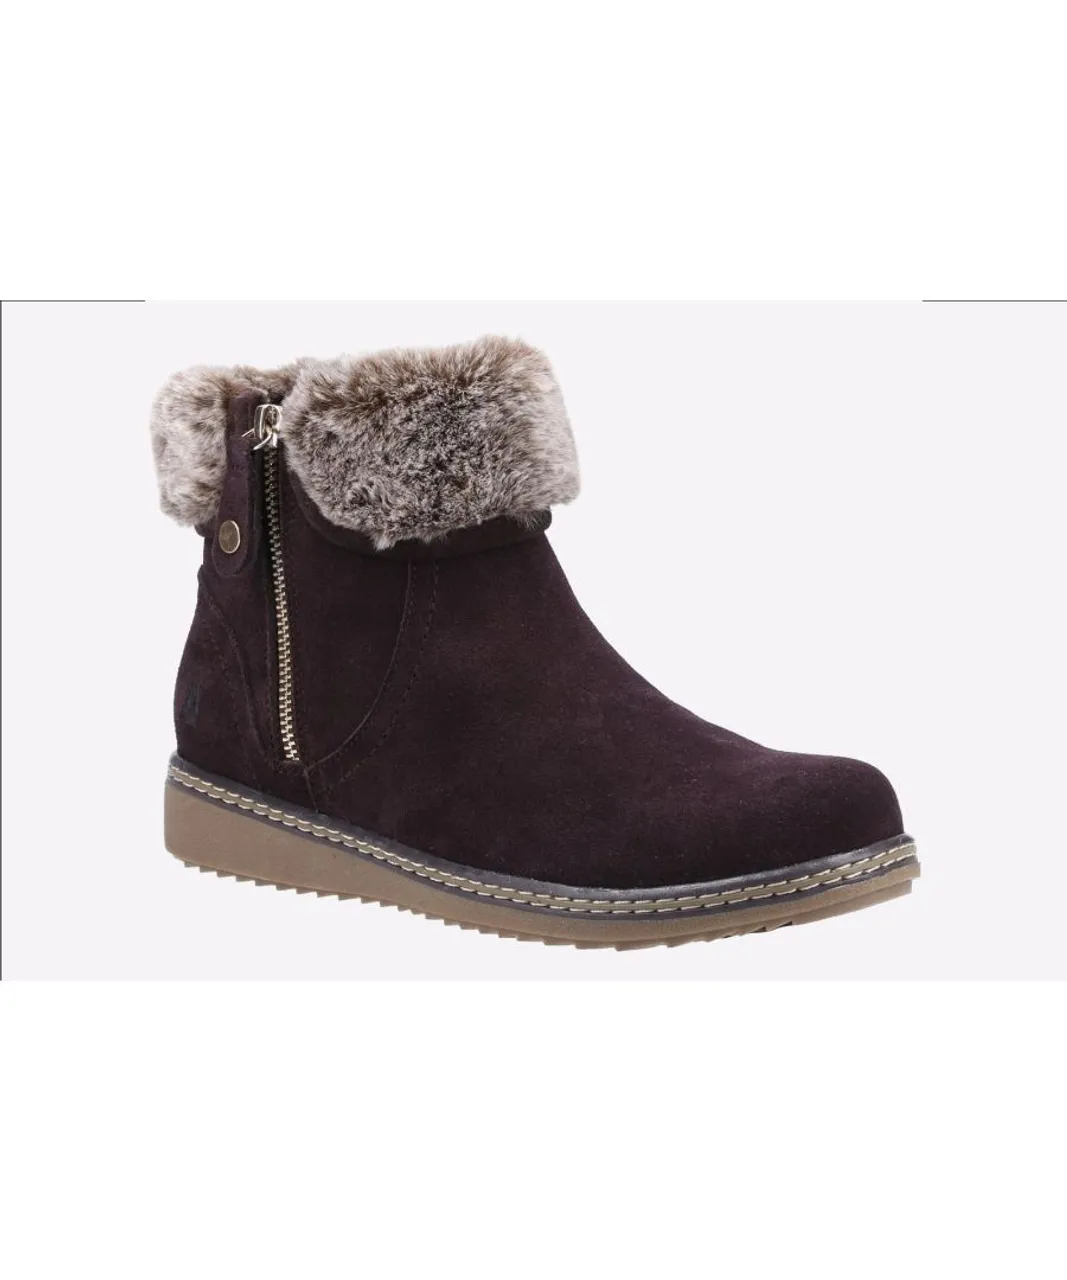 Hush Puppies Penny Zip Ankle Boot Womens - Brown